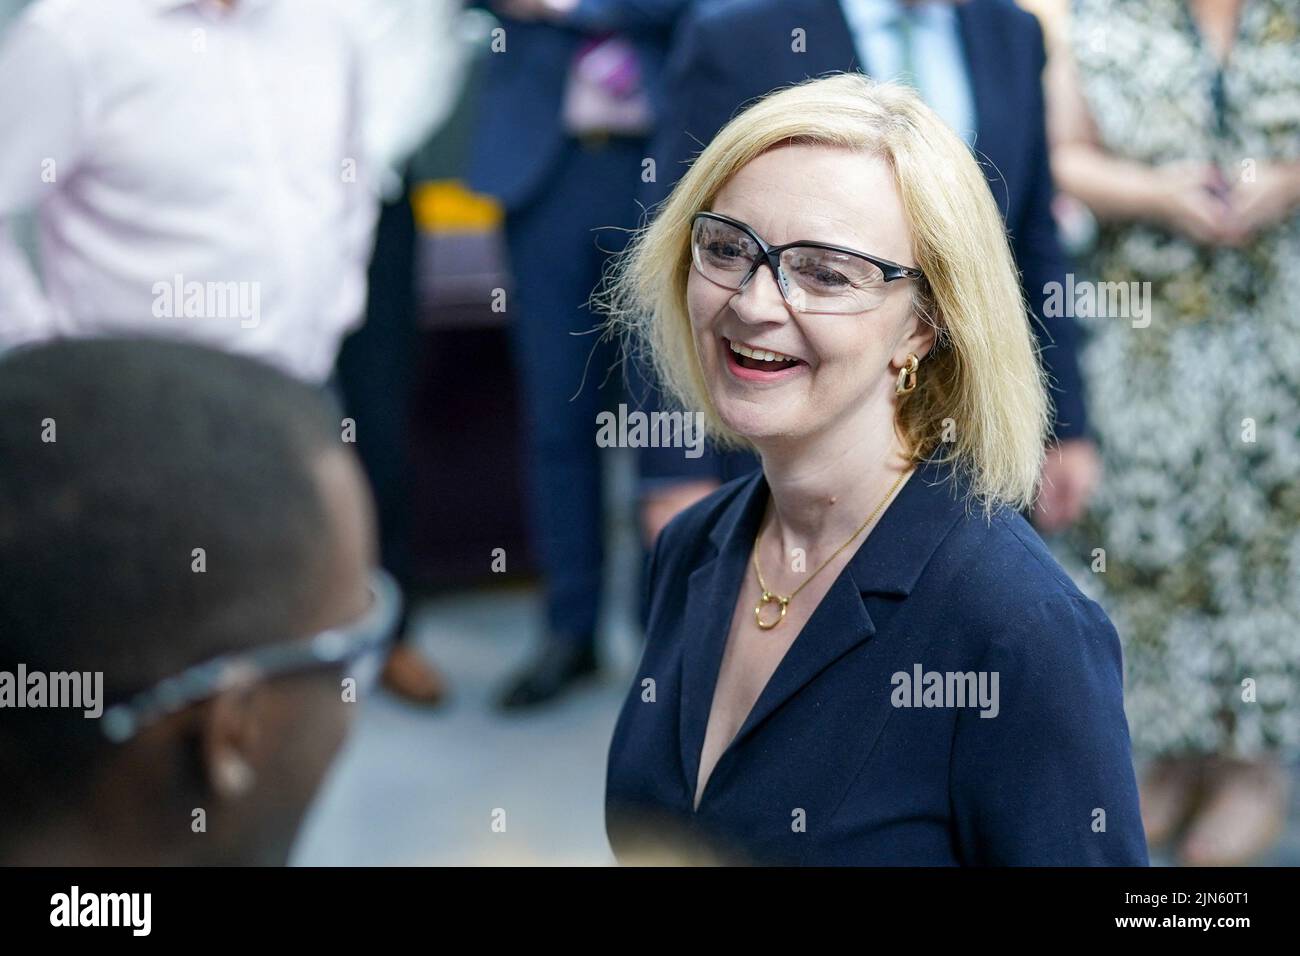 Britain's Conservative Party leadership candidate Liz Truss meets apprentices during a visit to the Reliance Precision engineering company ahead of a hustings event later, in Huddersfield, Britain August 9, 2022. Ian Forsyth/Pool via REUTERS Stock Photo